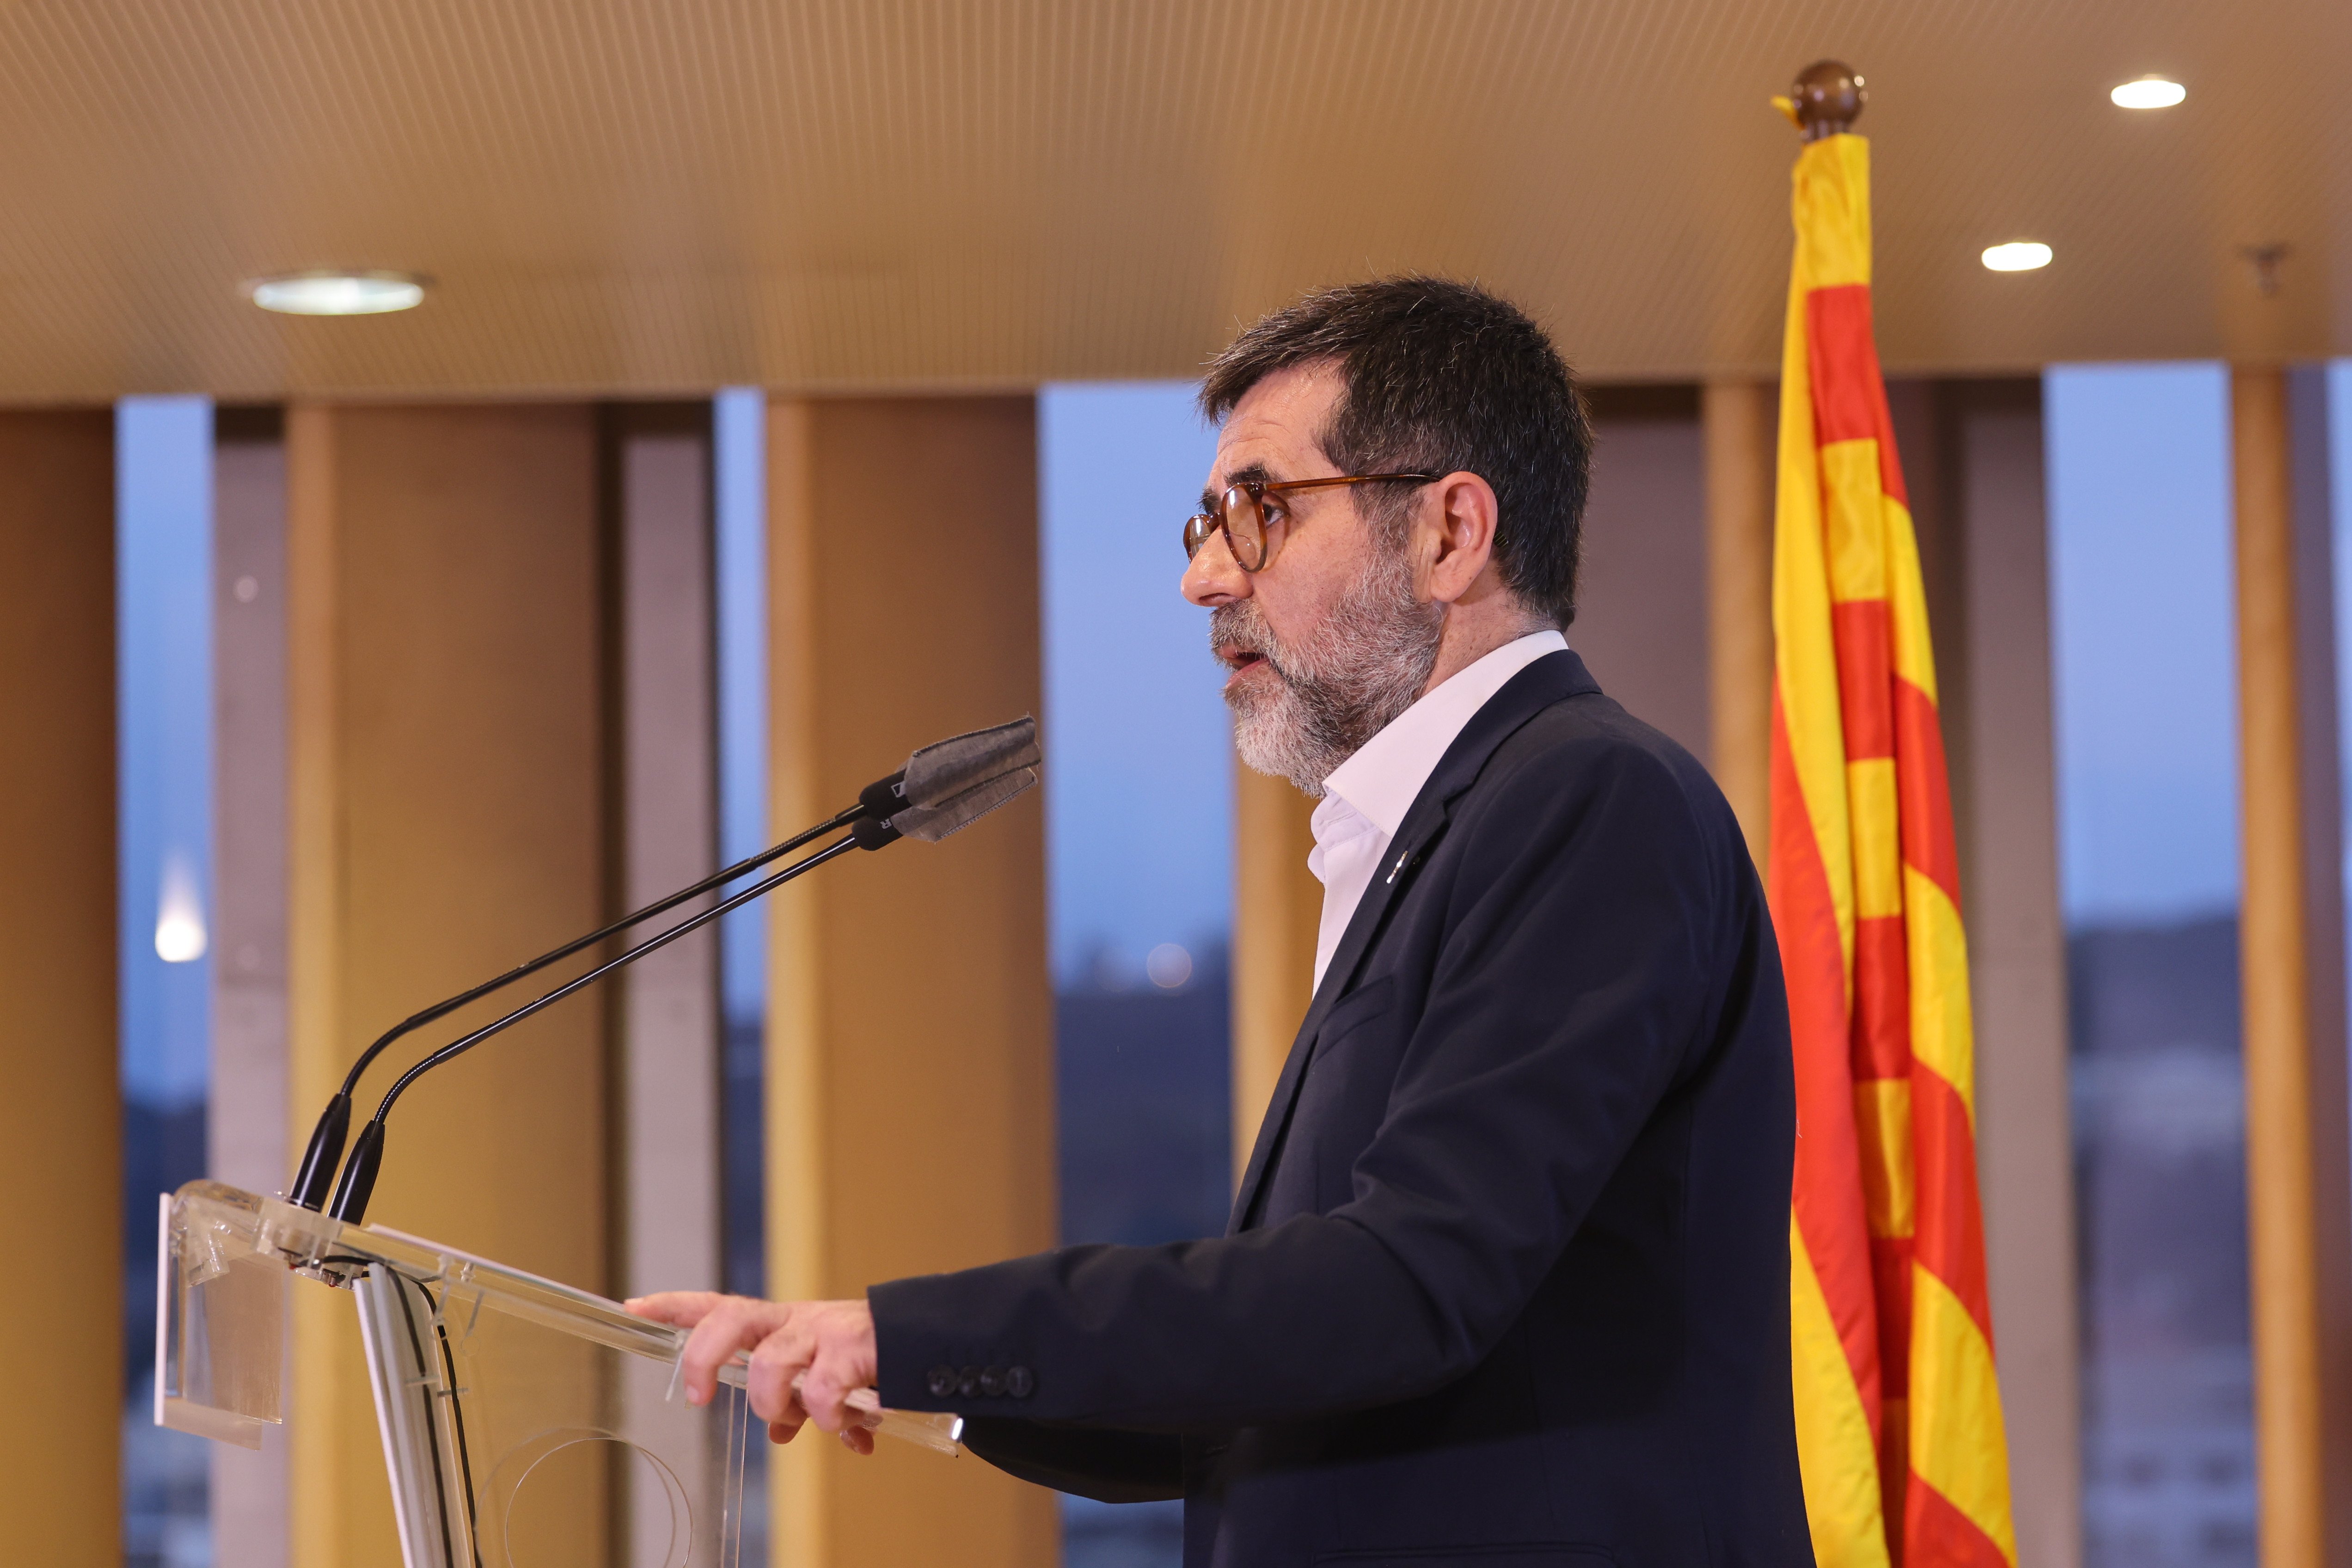 "Not yet possible": Jordi Sànchez cools off hopes for speedy Catalan government deal